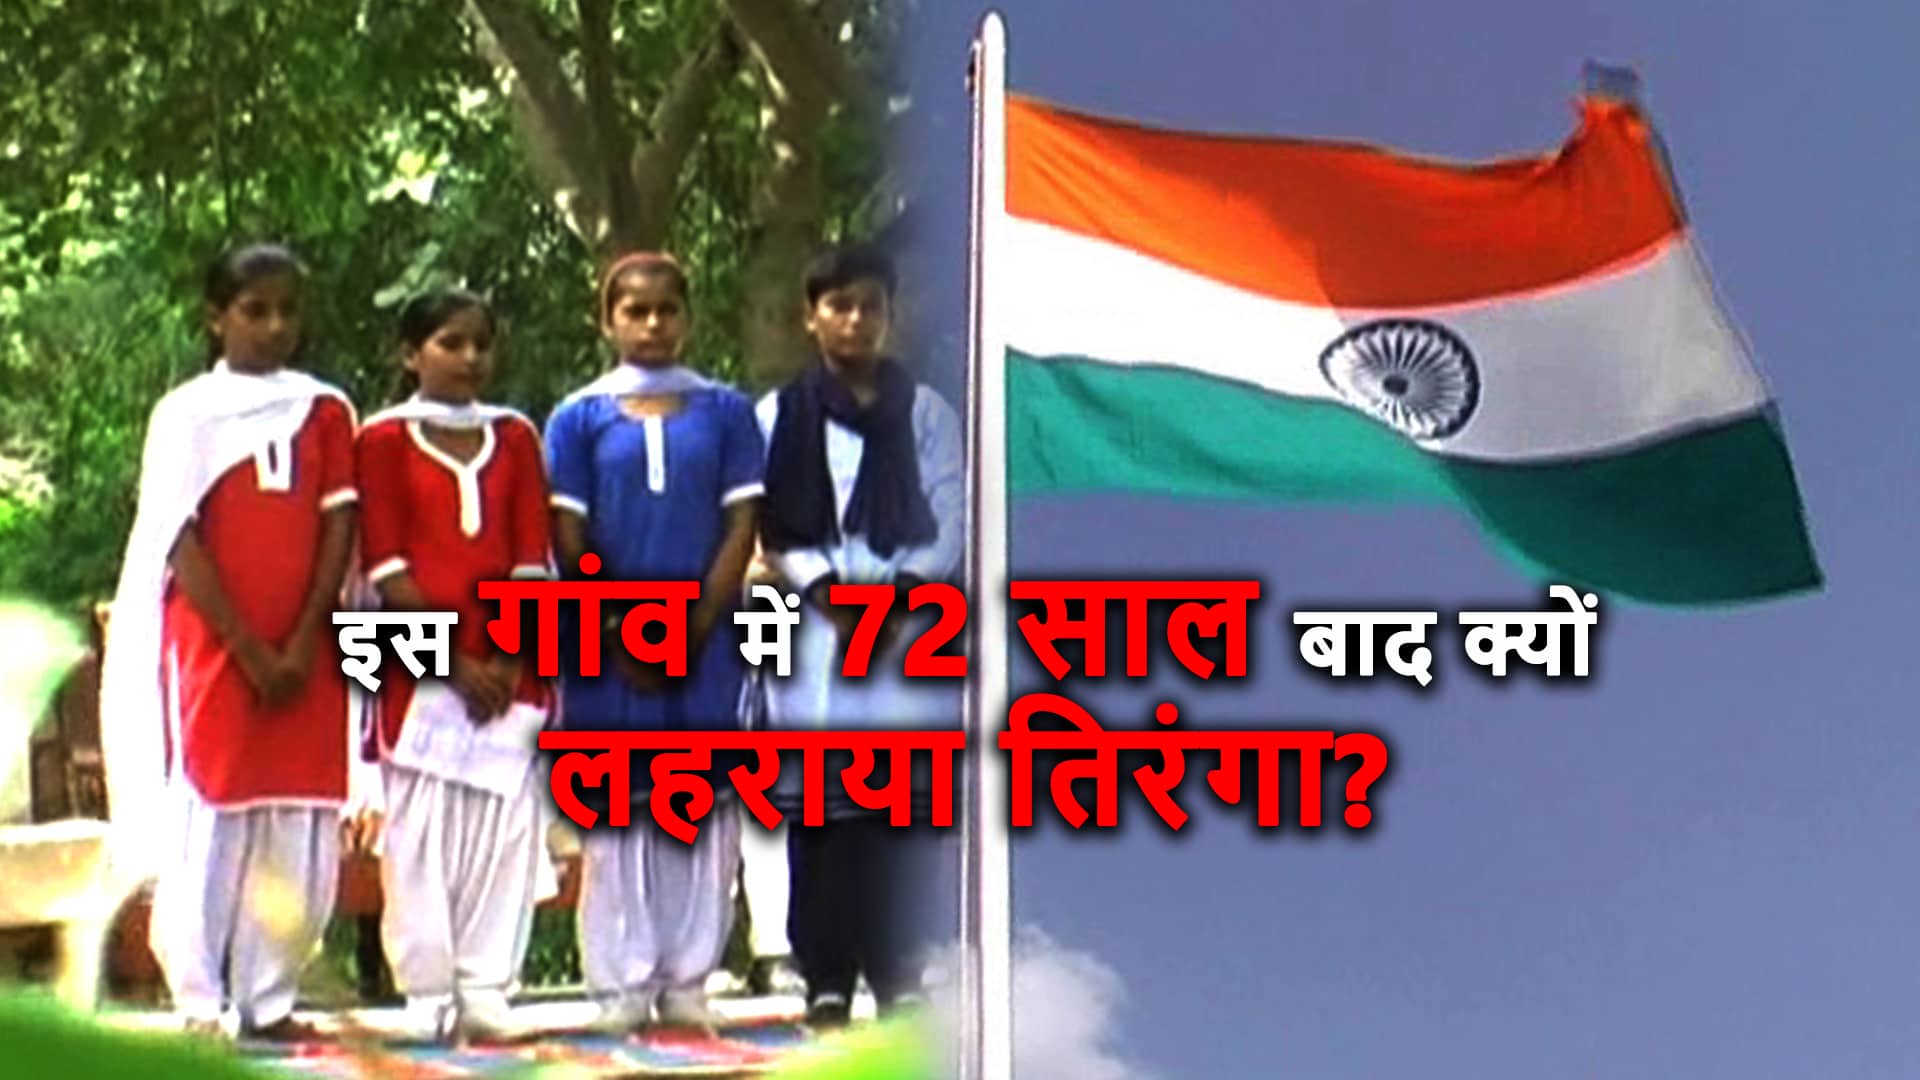 National flag hoisted first time after independence in in Rohnat village Haryana